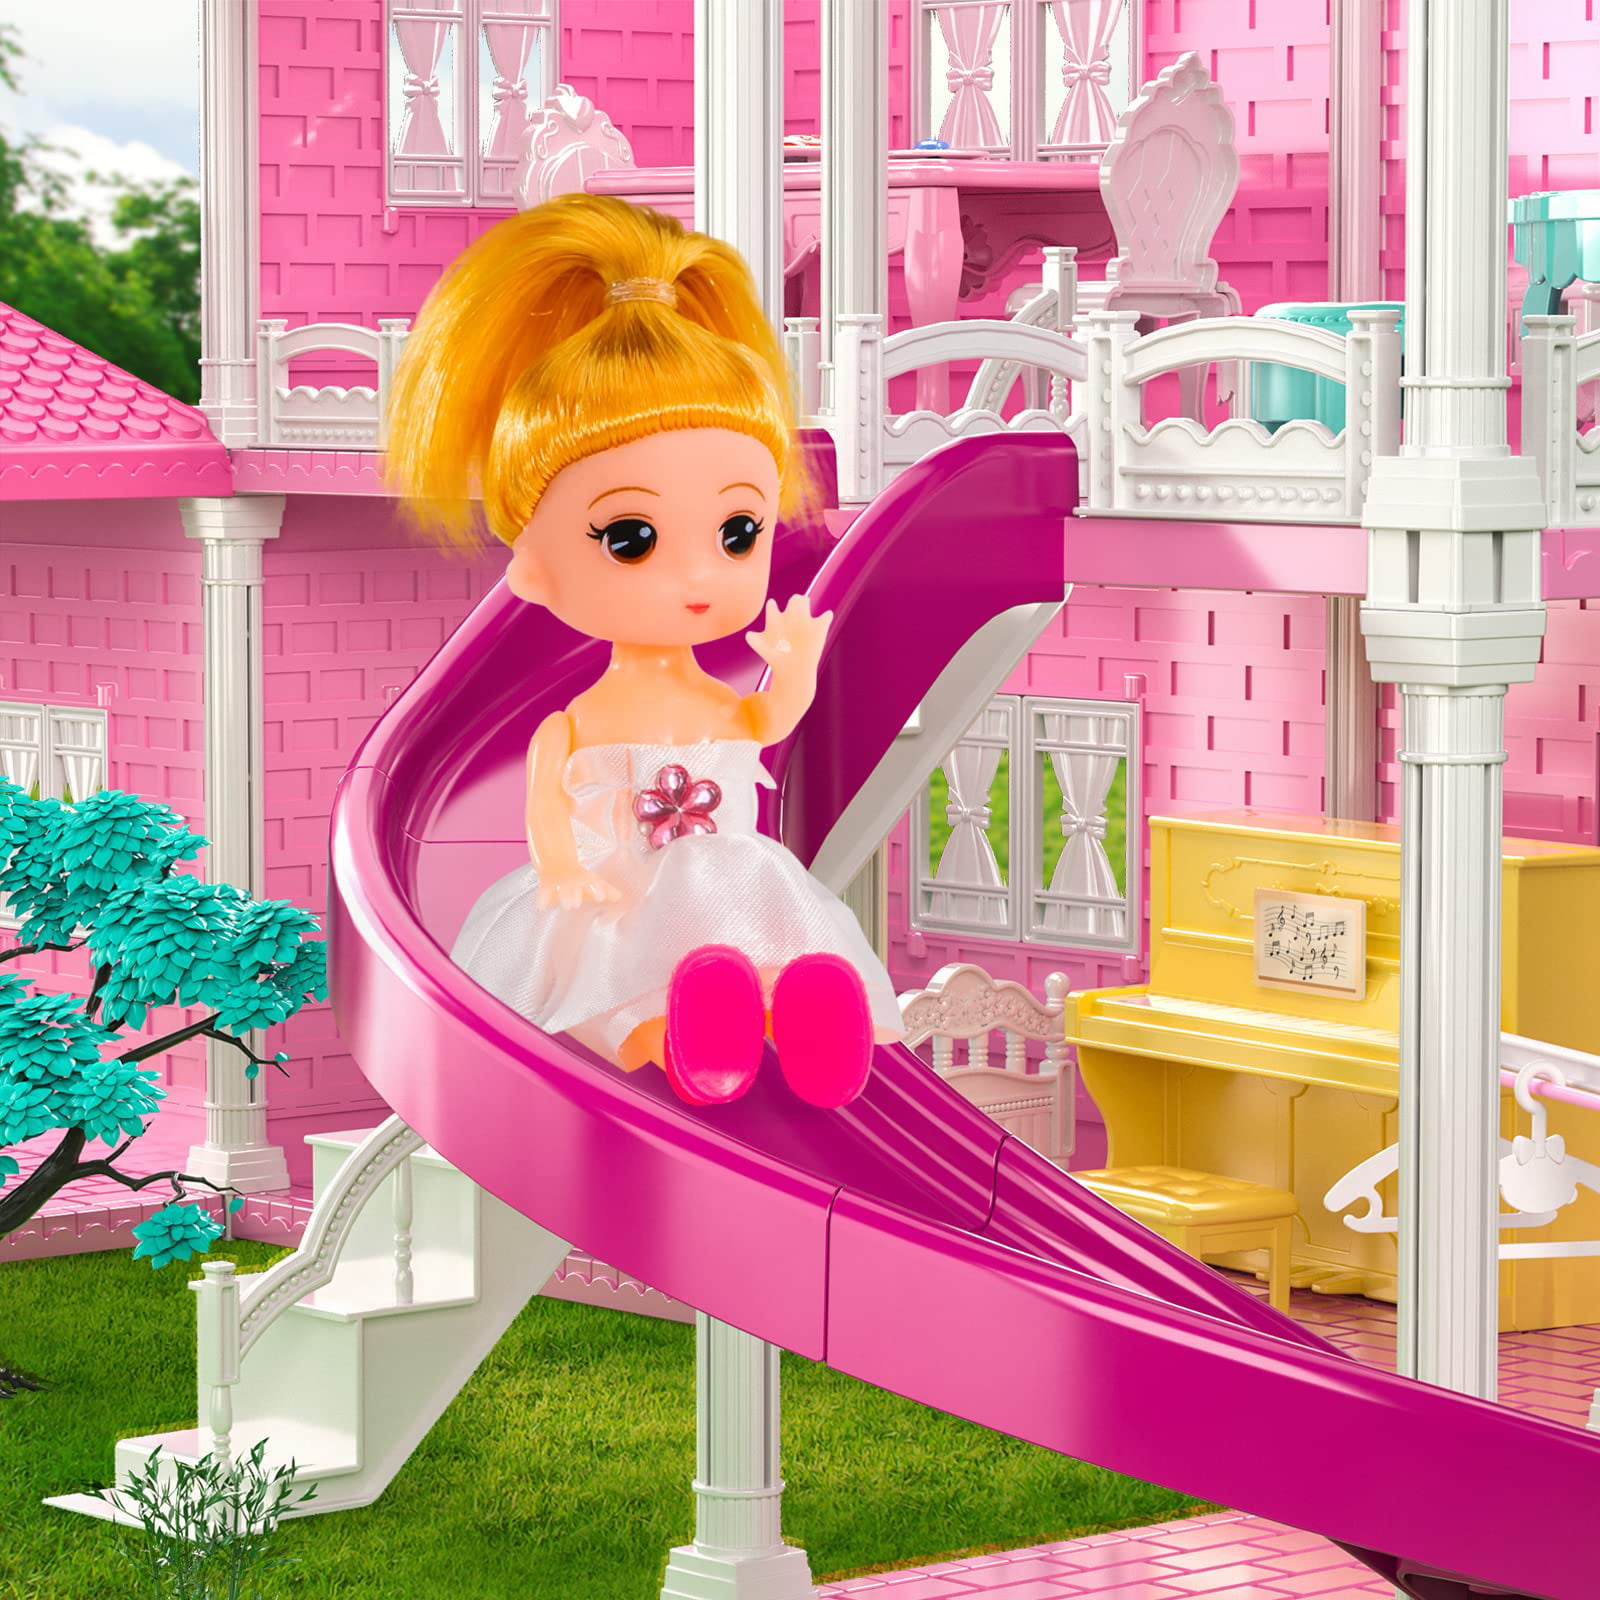 CHILDREN'S DOLL HOUSES - EVERY LITTLE GIRL'S DREAM – Charlotte sy Dimby